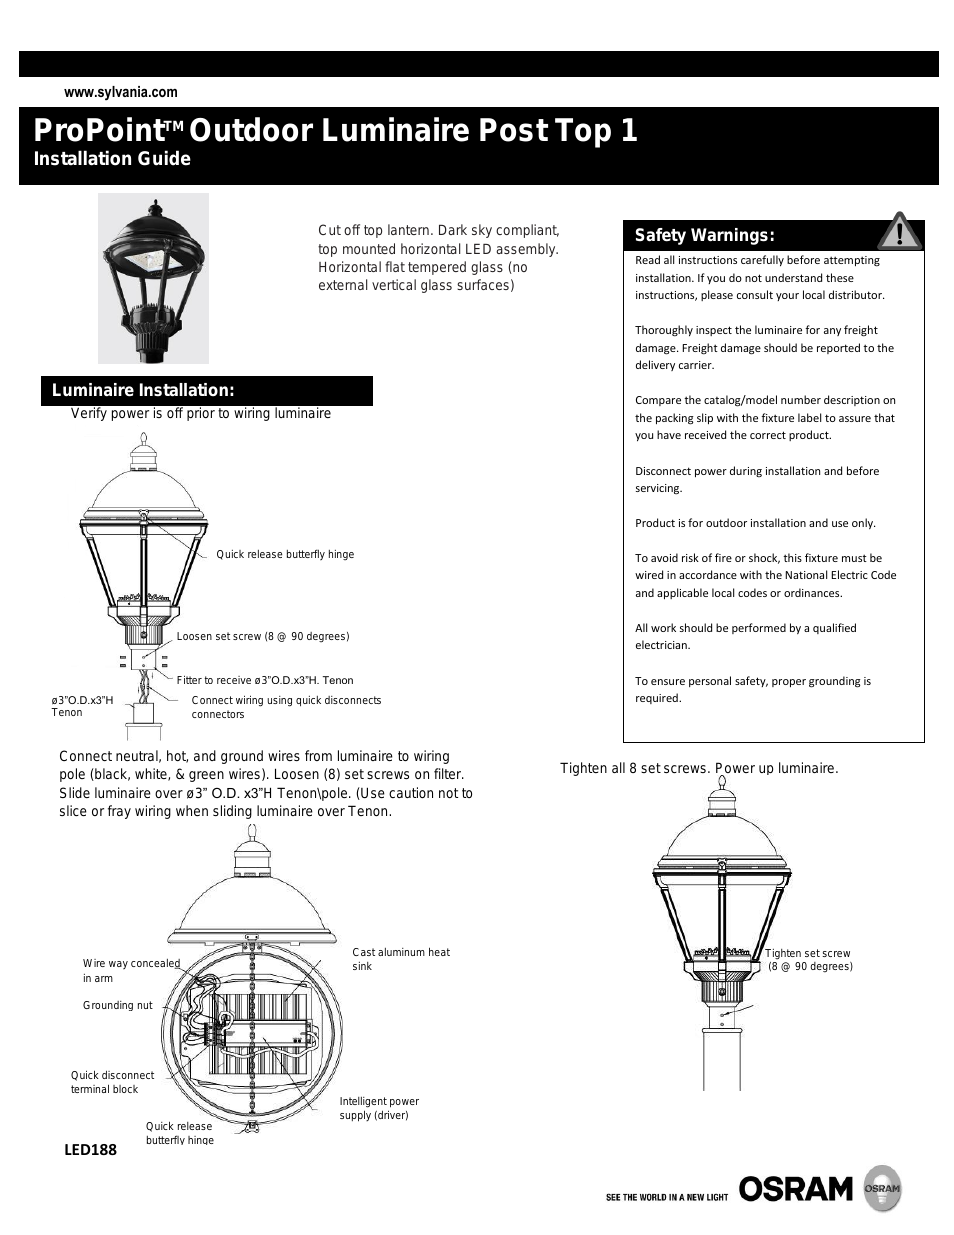 ProPoint Outdoor Luminaire Post Top 1